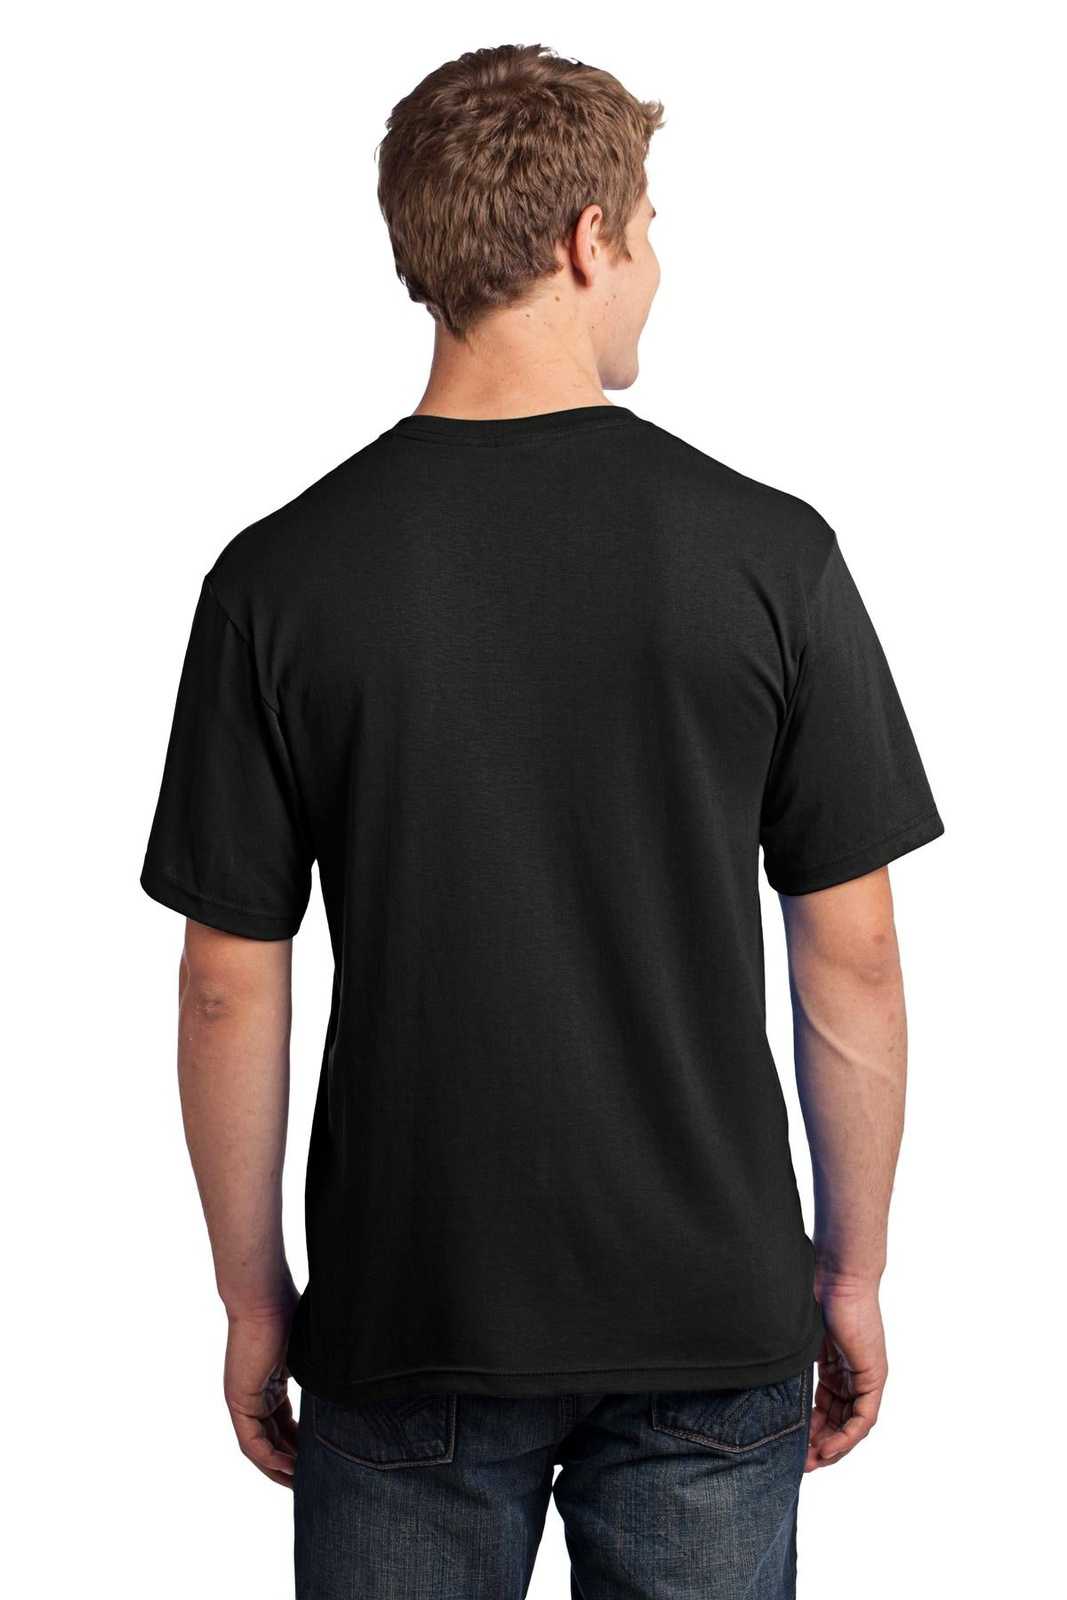 Port &amp; Company USA100P All-American Pocket Tee - Black - HIT a Double - 2